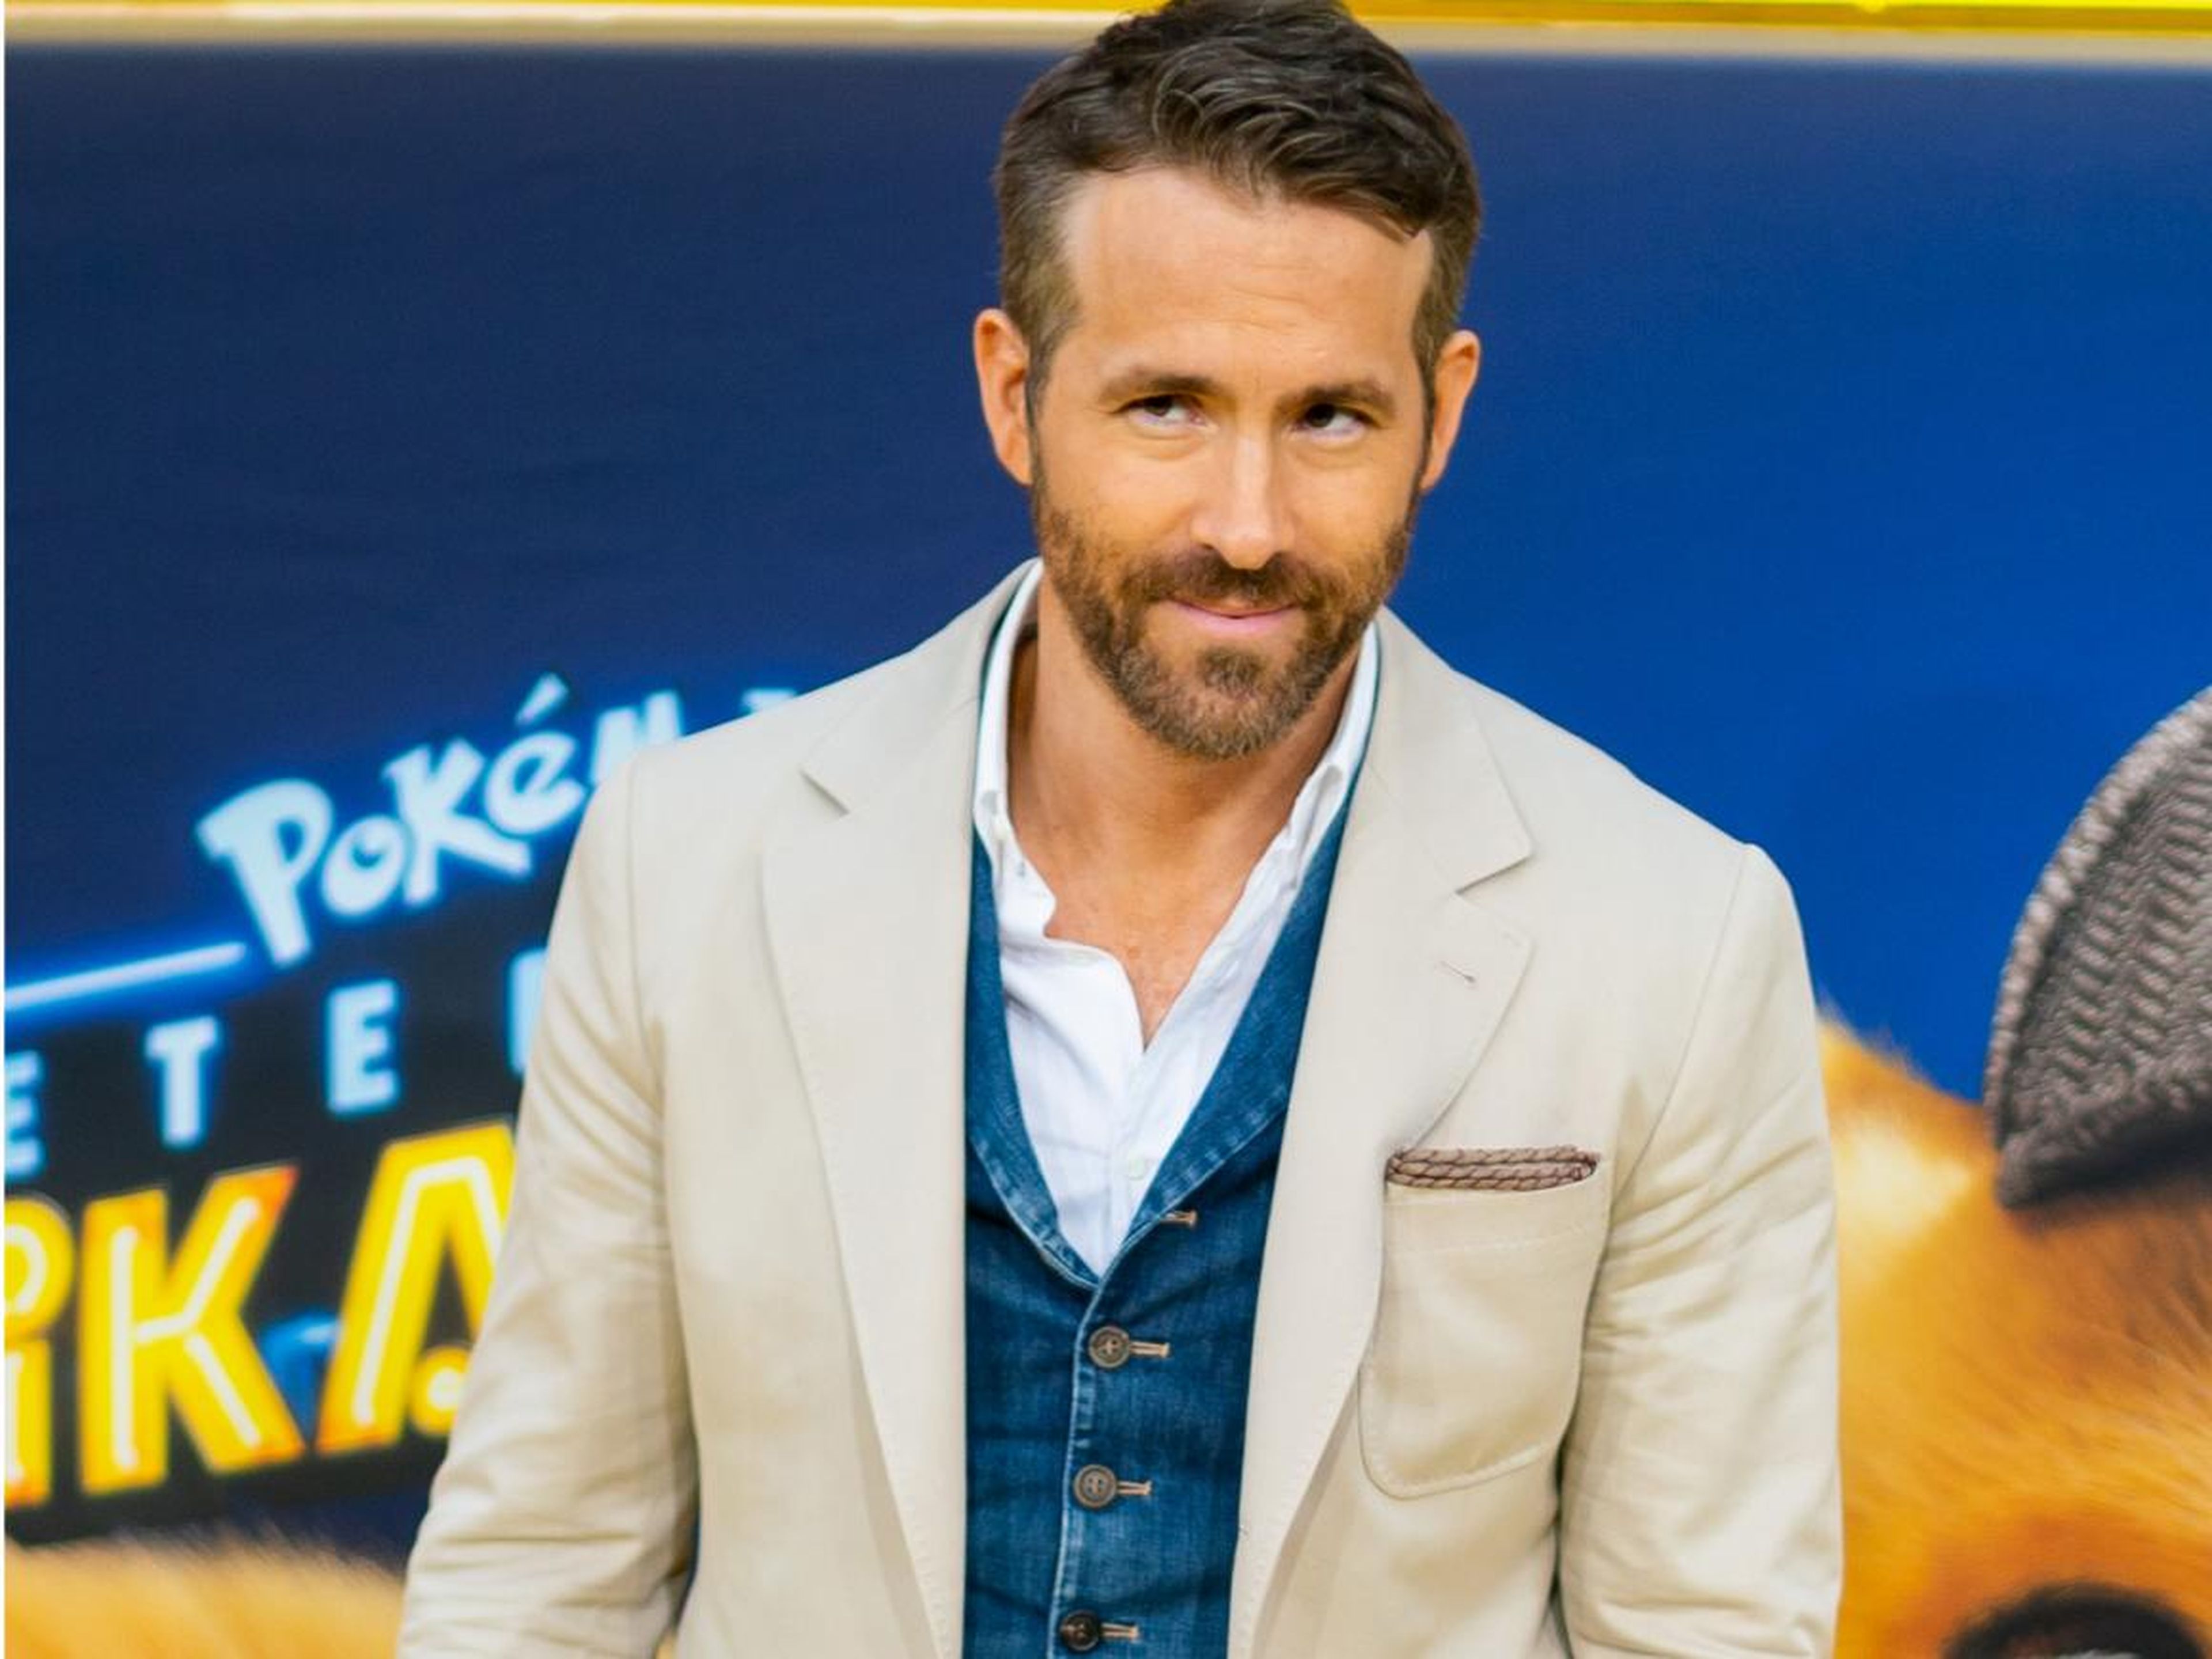 Ryan Reynolds at the premiere of "Detective Pikachu."